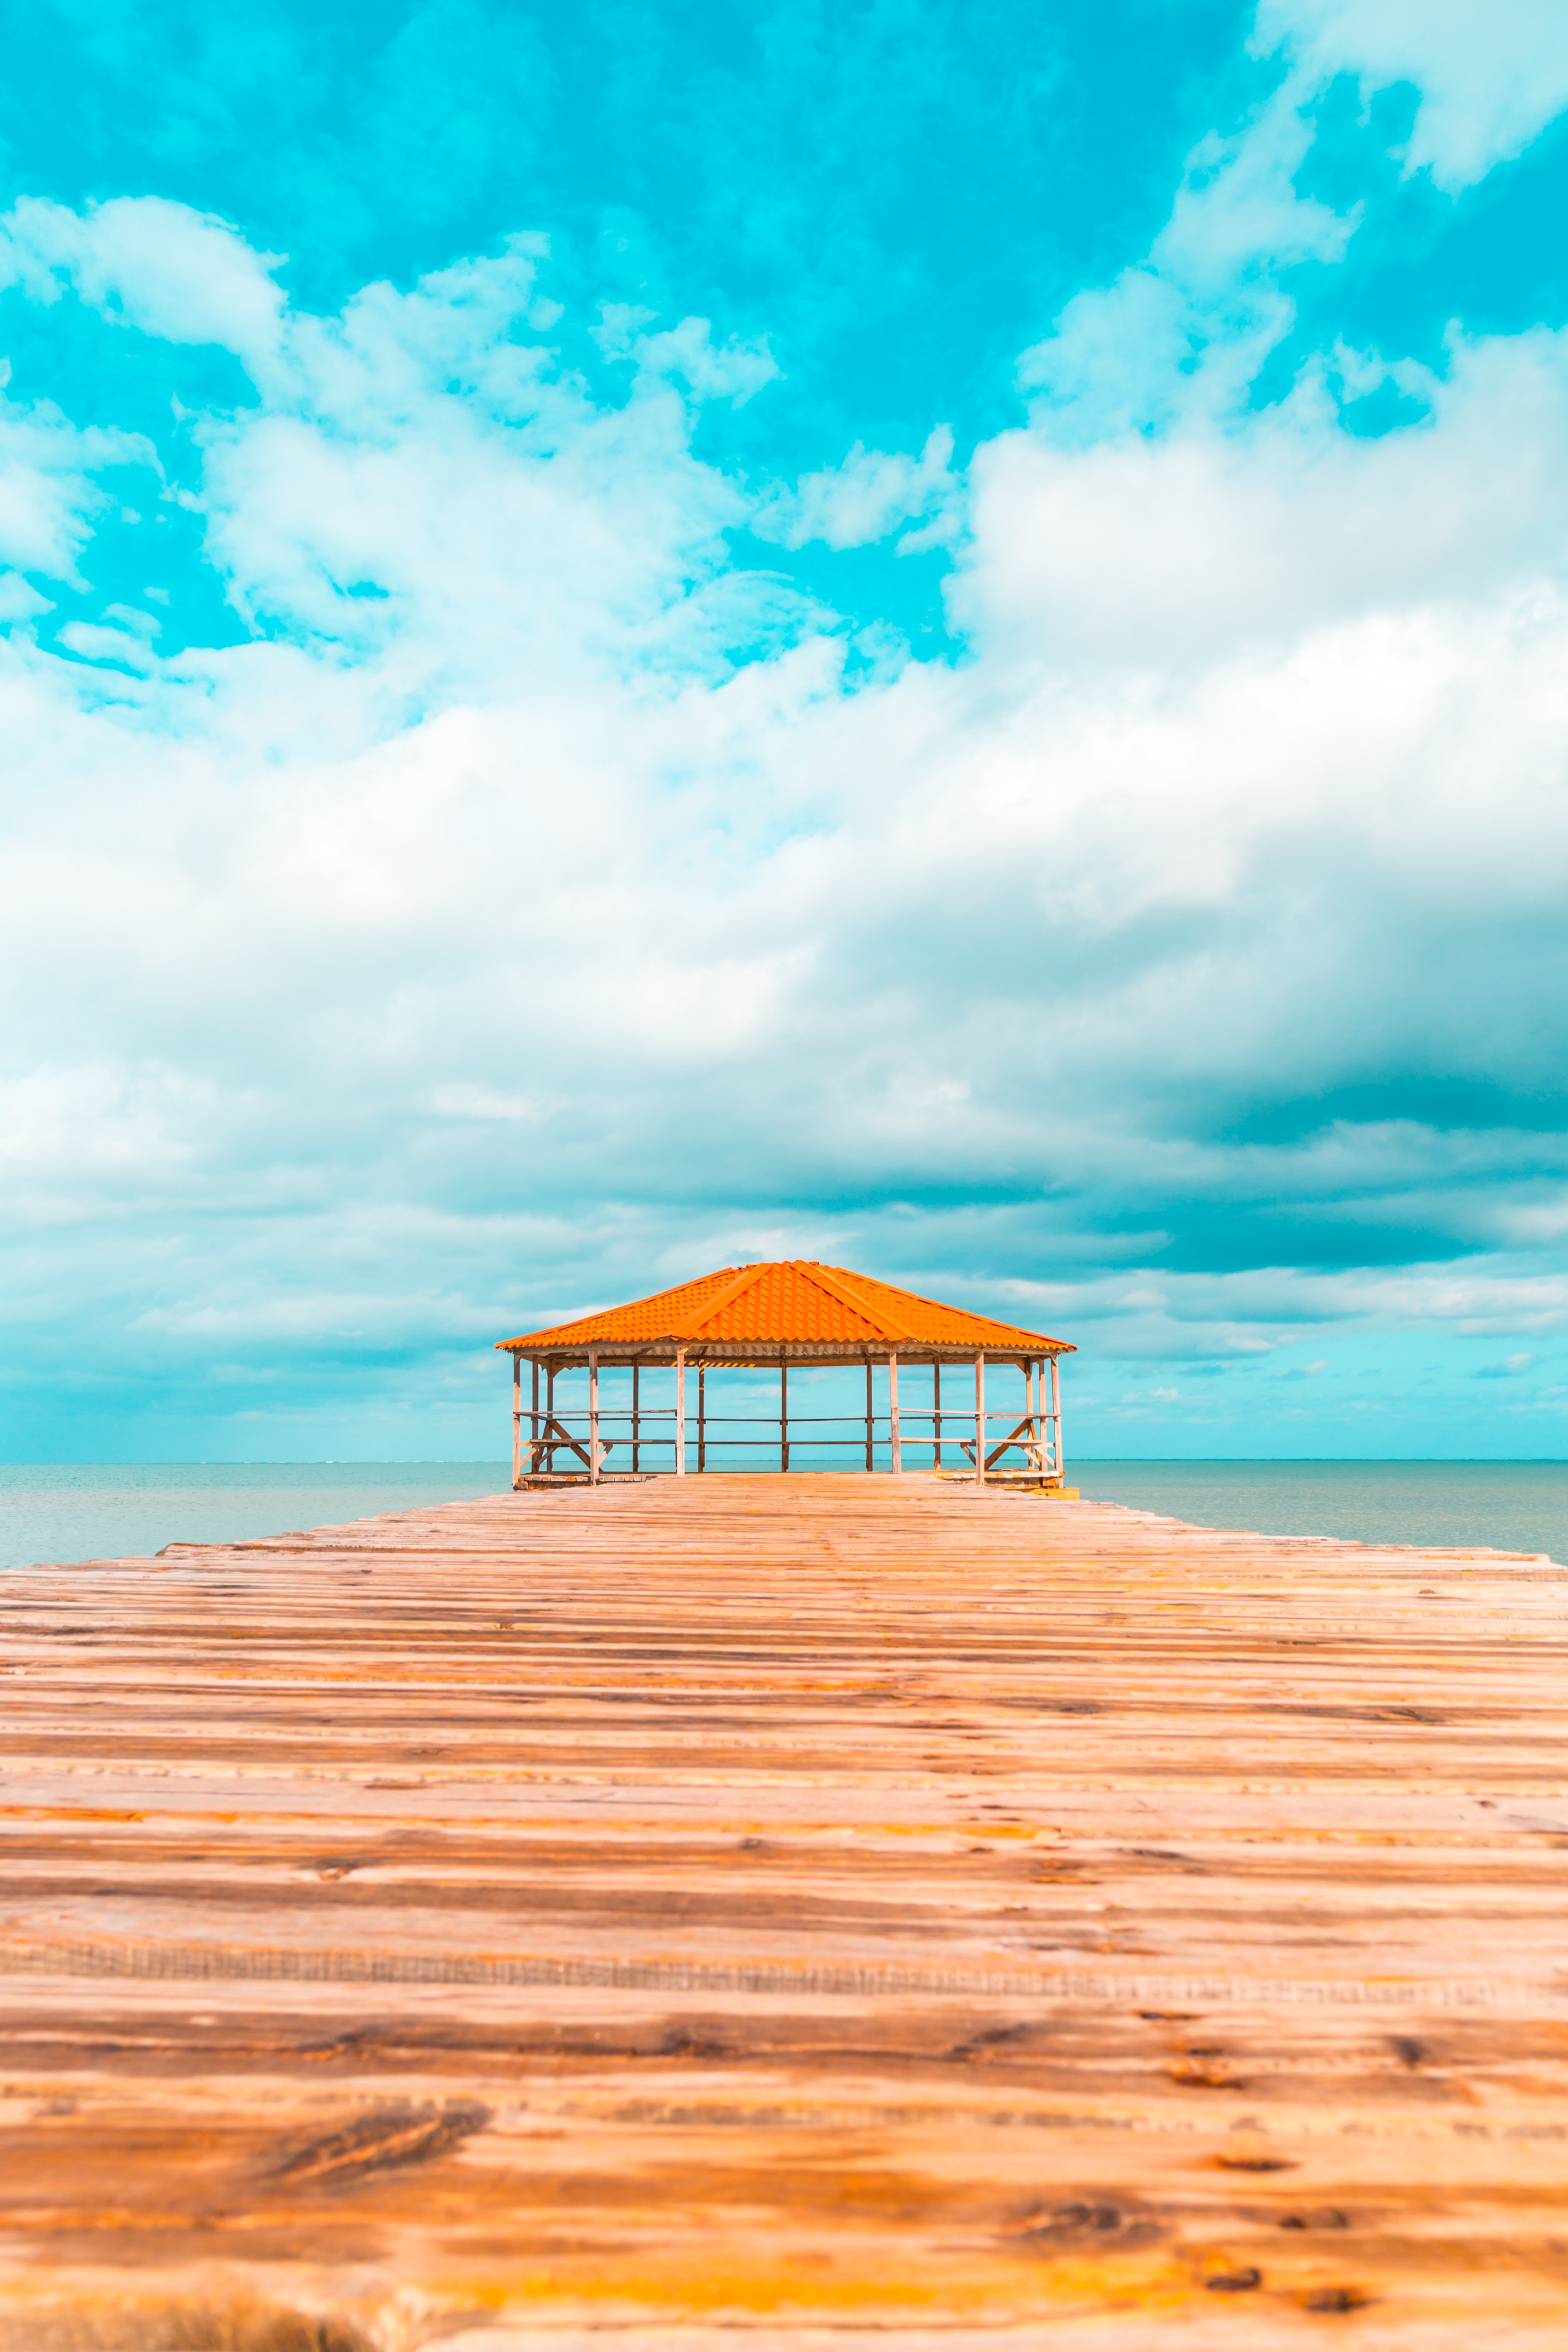 relaxation, rest, pier, nature, clouds, ocean, tropics, alcove, bower